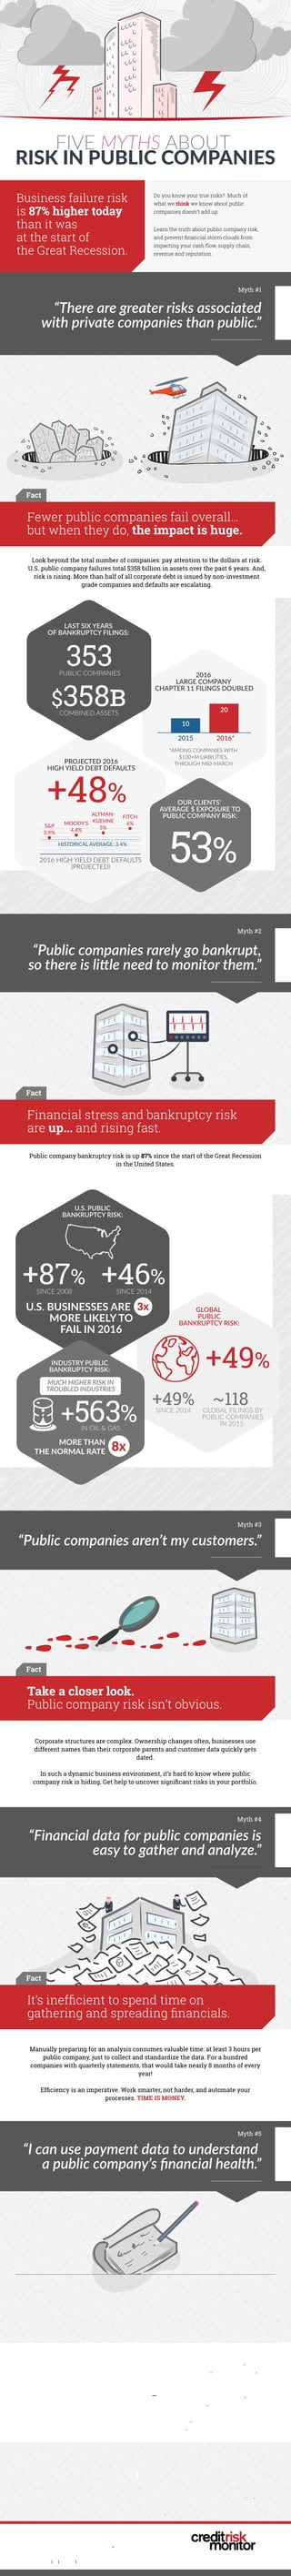 Fact
“There are greater risks associated
with private companies than public.”
FIVE MYTHS ABOUT
RISK IN PUBLIC COMPANIES
Fewer public companies fail overall…
but when they do, the impact is huge.
Public company bankruptcy risk is up 87% since the start of the Great Recession
in the United States.
Look beyond the total number of companies: pay attention to the dollars at risk.
U.S. public company failures total $358 billion in assets over the past 6 years. And,
risk is rising. More than half of all corporate debt is issued by non-investment
grade companies and defaults are escalating.
2016
LARGE COMPANY
CHAPTER 11 FILINGS DOUBLED
*AMONG COMPANIES WITH
$100+M LIABILITIES,
THROUGH MID-MARCH
2016*
20
2015
10
+48%
PROJECTED 2016
HIGH YIELD DEBT DEFAULTS
2016 HIGH YIELD DEBT DEFAULTS
(PROJECTED)
FITCH
6%S&P
3.9%
ALTMAN-
KUEHNE
5%
MOODY’S
4.4%
HISTORICAL AVERAGE: 3.4%
+49%
GLOBAL
PUBLIC
BANKRUPTCY RISK:
Learn the truth about public company risk,
and prevent ﬁnancial storm clouds from
impacting your cash ﬂow, supply chain,
revenue and reputation.
Do you know your true risks? Much of
what we think we know about public
companies doesn’t add up.
Business failure risk
is 87% higher today
than it was
at the start of
the Great Recession.
Myth #1
Fact
Financial stress and bankruptcy risk
are up... and rising fast.
Corporate structures are complex. Ownership changes often, businesses use
different names than their corporate parents and customer data quickly gets
dated.
In such a dynamic business environment, it’s hard to know where public
company risk is hiding. Get help to uncover signiﬁcant risks in your portfolio.
Fact
Take a closer look.
Public company risk isn’t obvious.
“Public companies rarely go bankrupt,
so there is little need to monitor them.”
Myth #2
“Public companies aren’t my customers.”
Myth #3
53%
OUR CLIENTS’
AVERAGE $ EXPOSURE TO
PUBLIC COMPANY RISK:
+49%SINCE 2014
~118GLOBAL FILINGS BY
PUBLIC COMPANIES
IN 2015
Manually preparing for an analysis consumes valuable time: at least 3 hours per
public company, just to collect and standardize the data. For a hundred
companies with quarterly statements, that would take nearly 8 months of every
year!
Efﬁciency is an imperative. Work smarter, not harder, and automate your
processes. TIME IS MONEY.
“Financial data for public companies is
easy to gather and analyze.”
Myth #4
Payment history works to judge a private company's future ability to pay. But
don't depend on it to predict public company ﬁnancial health. It's misleading.
Why? Public companies have more access to capital and ﬁnancing than private
companies, so they’re able to pay on time — right up until ﬁling Chapter 11. And
sometimes, they pay late because they can.
Don’t get surprised by public company ﬁnancial stress. Use the right ﬁnancial
metrics to stay ahead of risk.
Fact
Actually, you can’t. Payment data
underestimates public company risk.
“I can use payment data to understand
a public company’s ﬁnancial health.”
Myth #5
353PUBLIC COMPANIES
$358bCOMBINED ASSETS
LAST SIX YEARS
OF BANKRUPTCY FILINGS:
+87%SINCE 2008
+46%SINCE 2014
U.S. PUBLIC
BANKRUPTCY RISK:
U.S. BUSINESSES ARE
MORE LIKELY TO
FAIL IN 2016
3X
+563%
INDUSTRY PUBLIC
BANKRUPTCY RISK:
IN OIL & GAS
MORE THAN
THE NORMAL RATE 8X
MUCH HIGHER RISK IN
TROUBLED INDUSTRIES
Fact
It’s inefﬁcient to spend time on
gathering and spreading ﬁnancials.
Get help uncovering your biggest risks:
https://creditriskmonitor.com
KNOW YOUR RISKS
You could be sitting on a ticking time bomb of public company risk, without realizing it.
CreditRiskMonitor predicts public company bankruptcy with 95% accuracy, helping you stay ahead of
signiﬁcant risk.
GET A FREE RISK ASSESSMENT
SOURCES: CREDITRISKMONITOR, DR. EDWARD ALTMAN
 